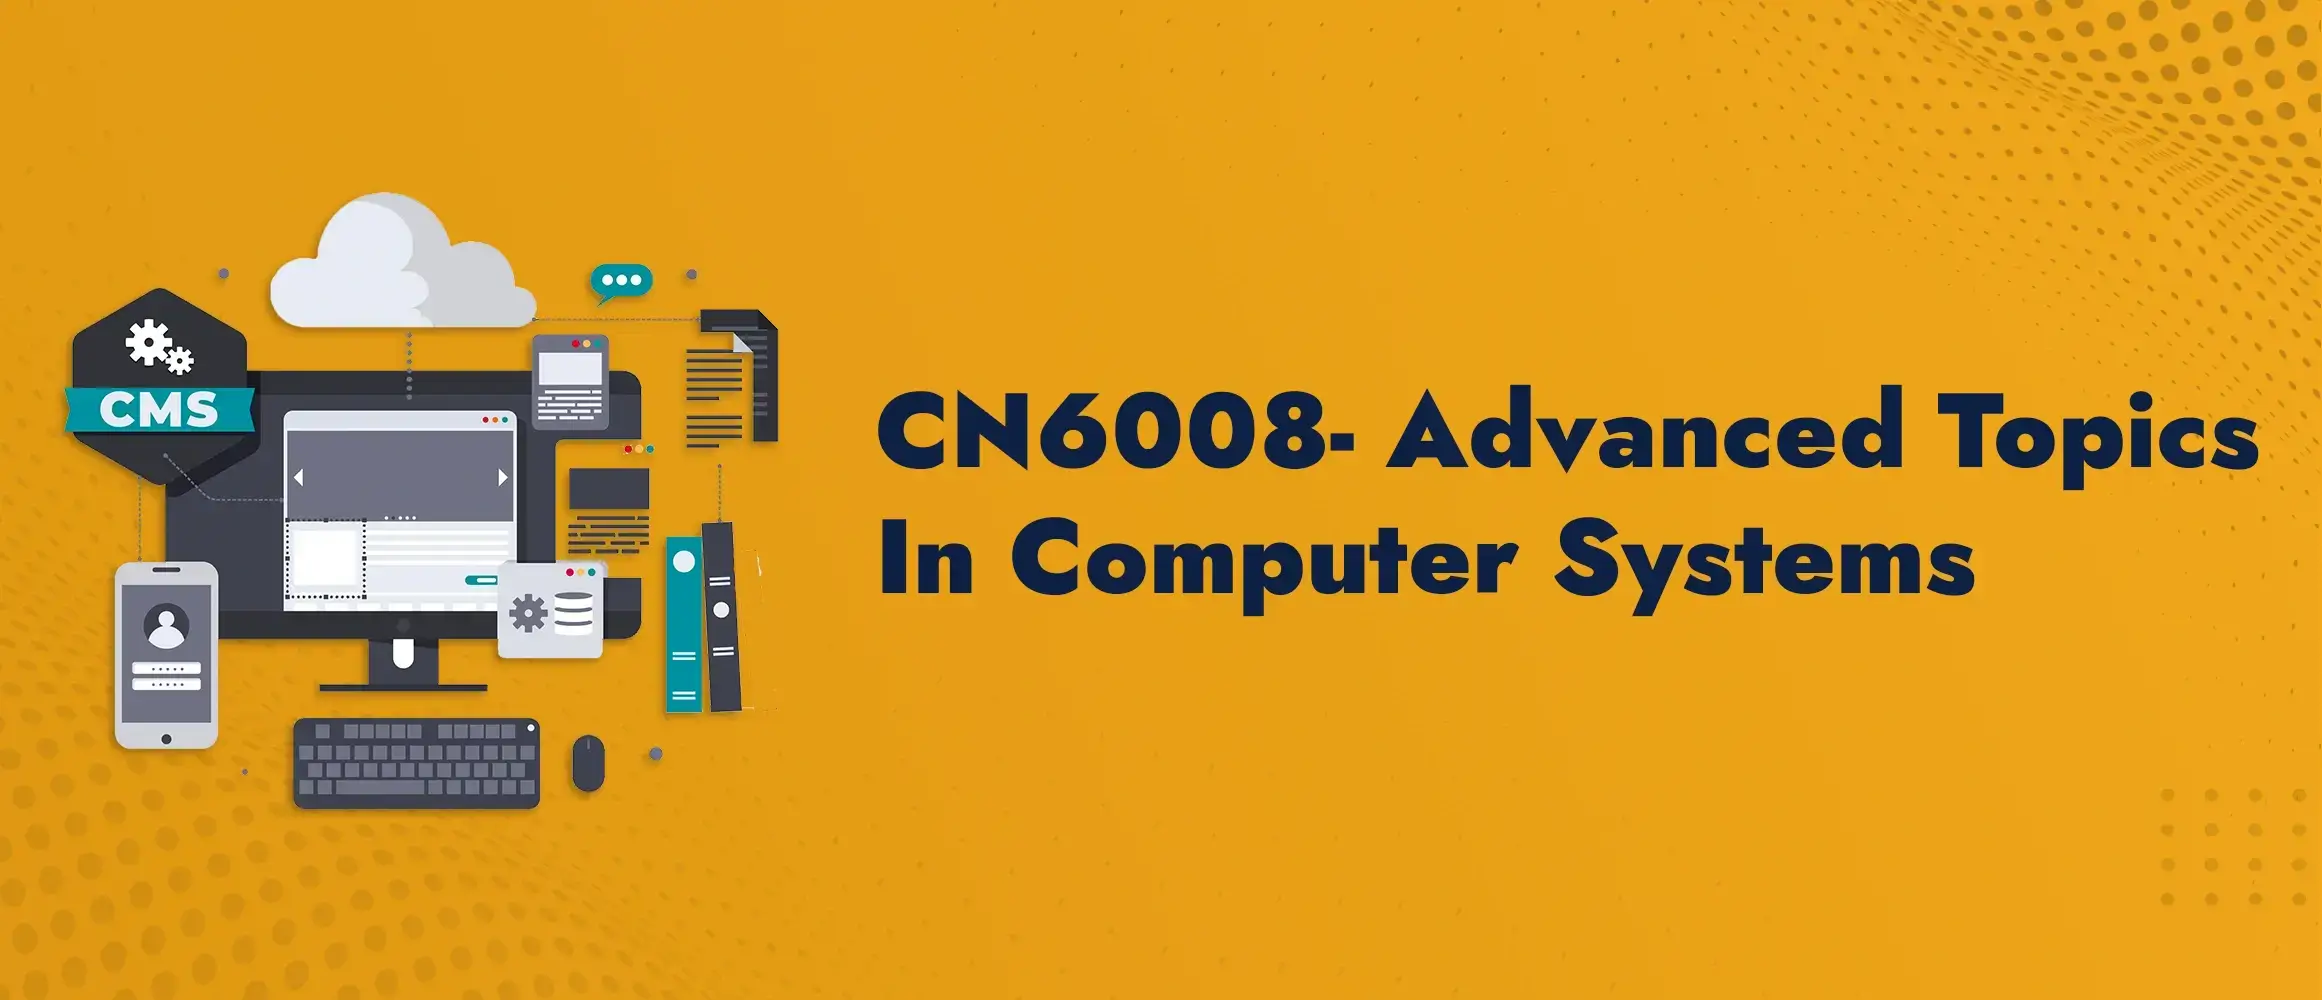 CN6008 Advanced Topics In Computer Systems